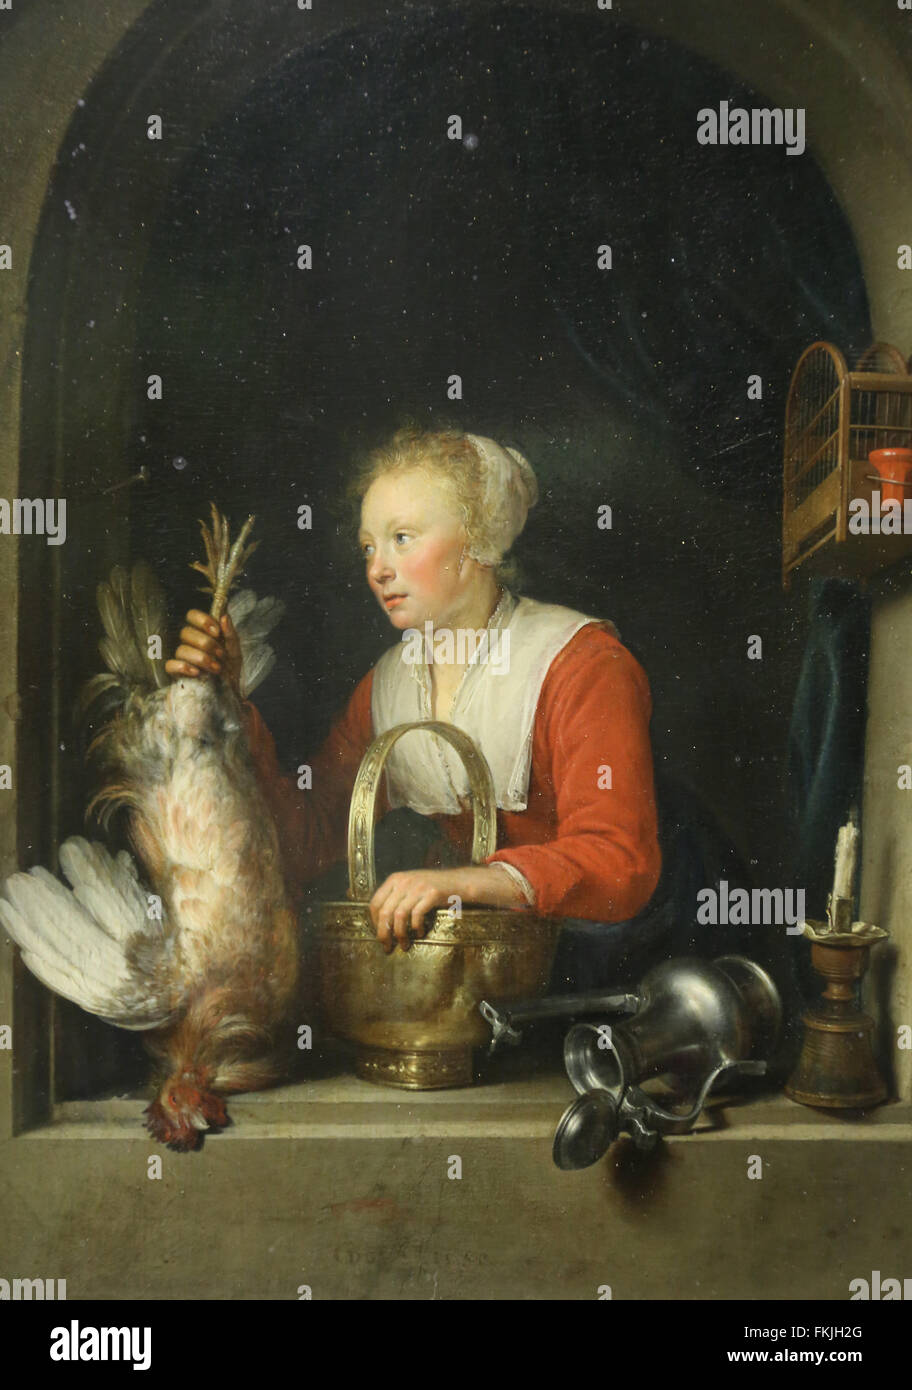 Gerad Dou (1613-1675). Dutch painter. Woman hanging a rooster in her windows or Dutch housewife 1650. Louvre Museum. Paris. Stock Photo